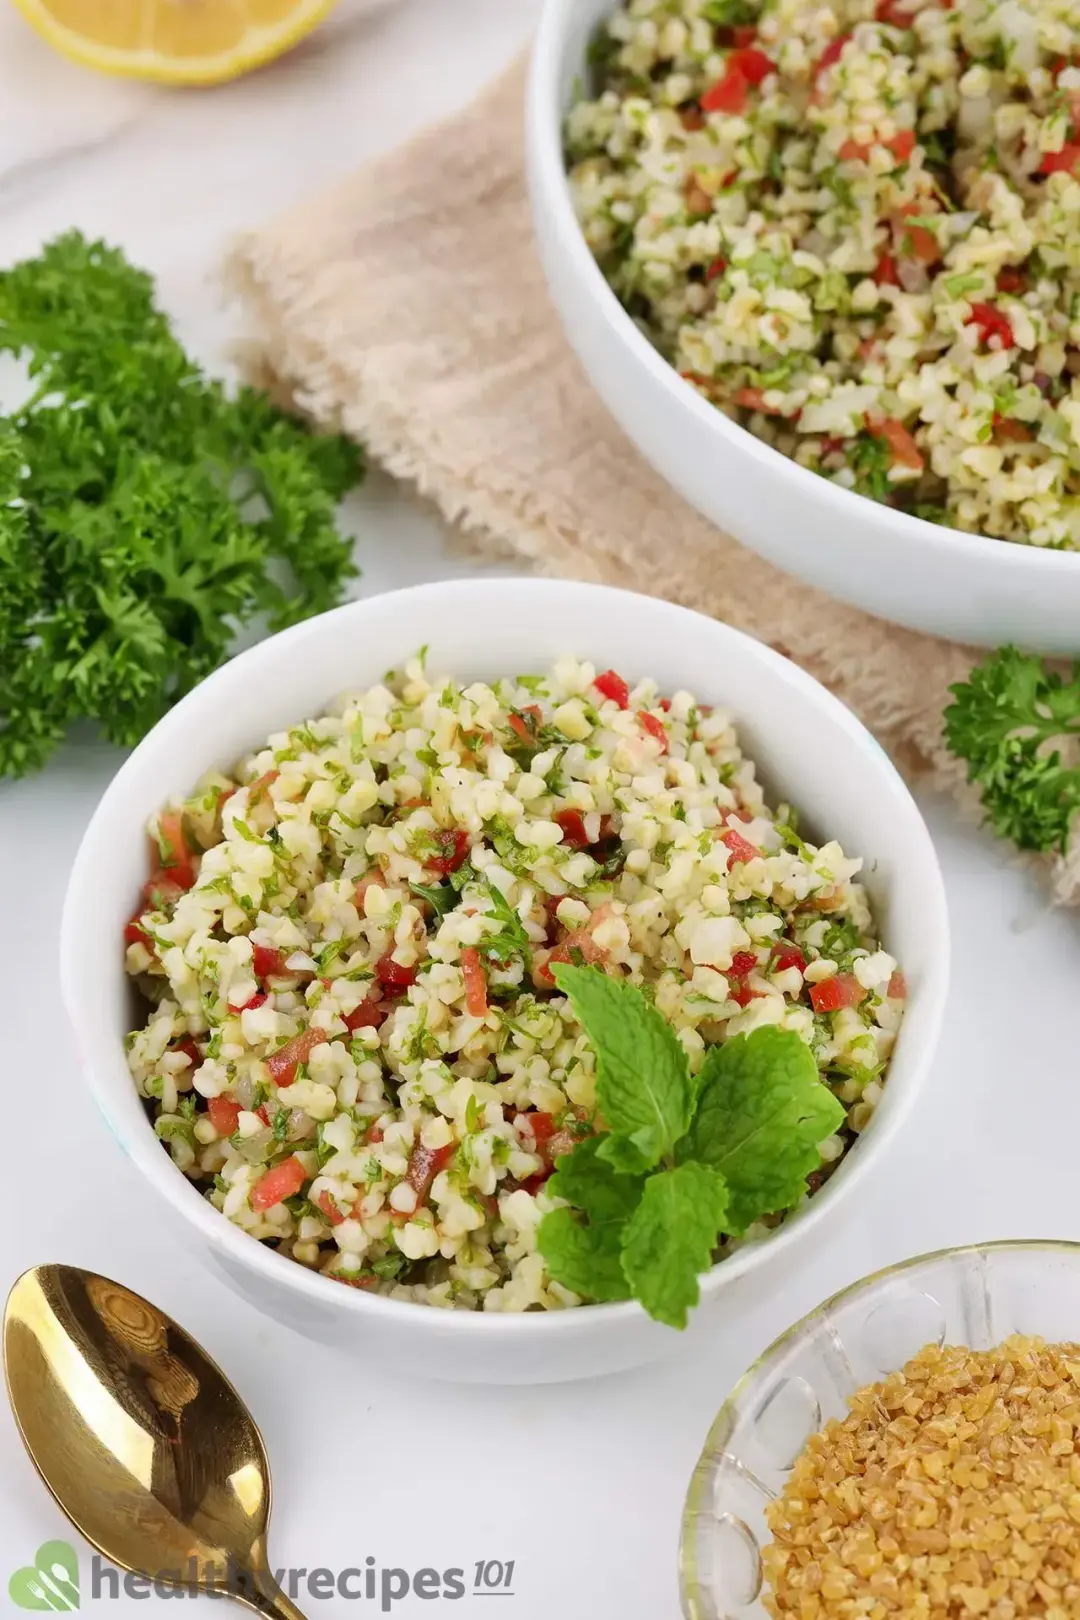 what to eat with tabbouleh